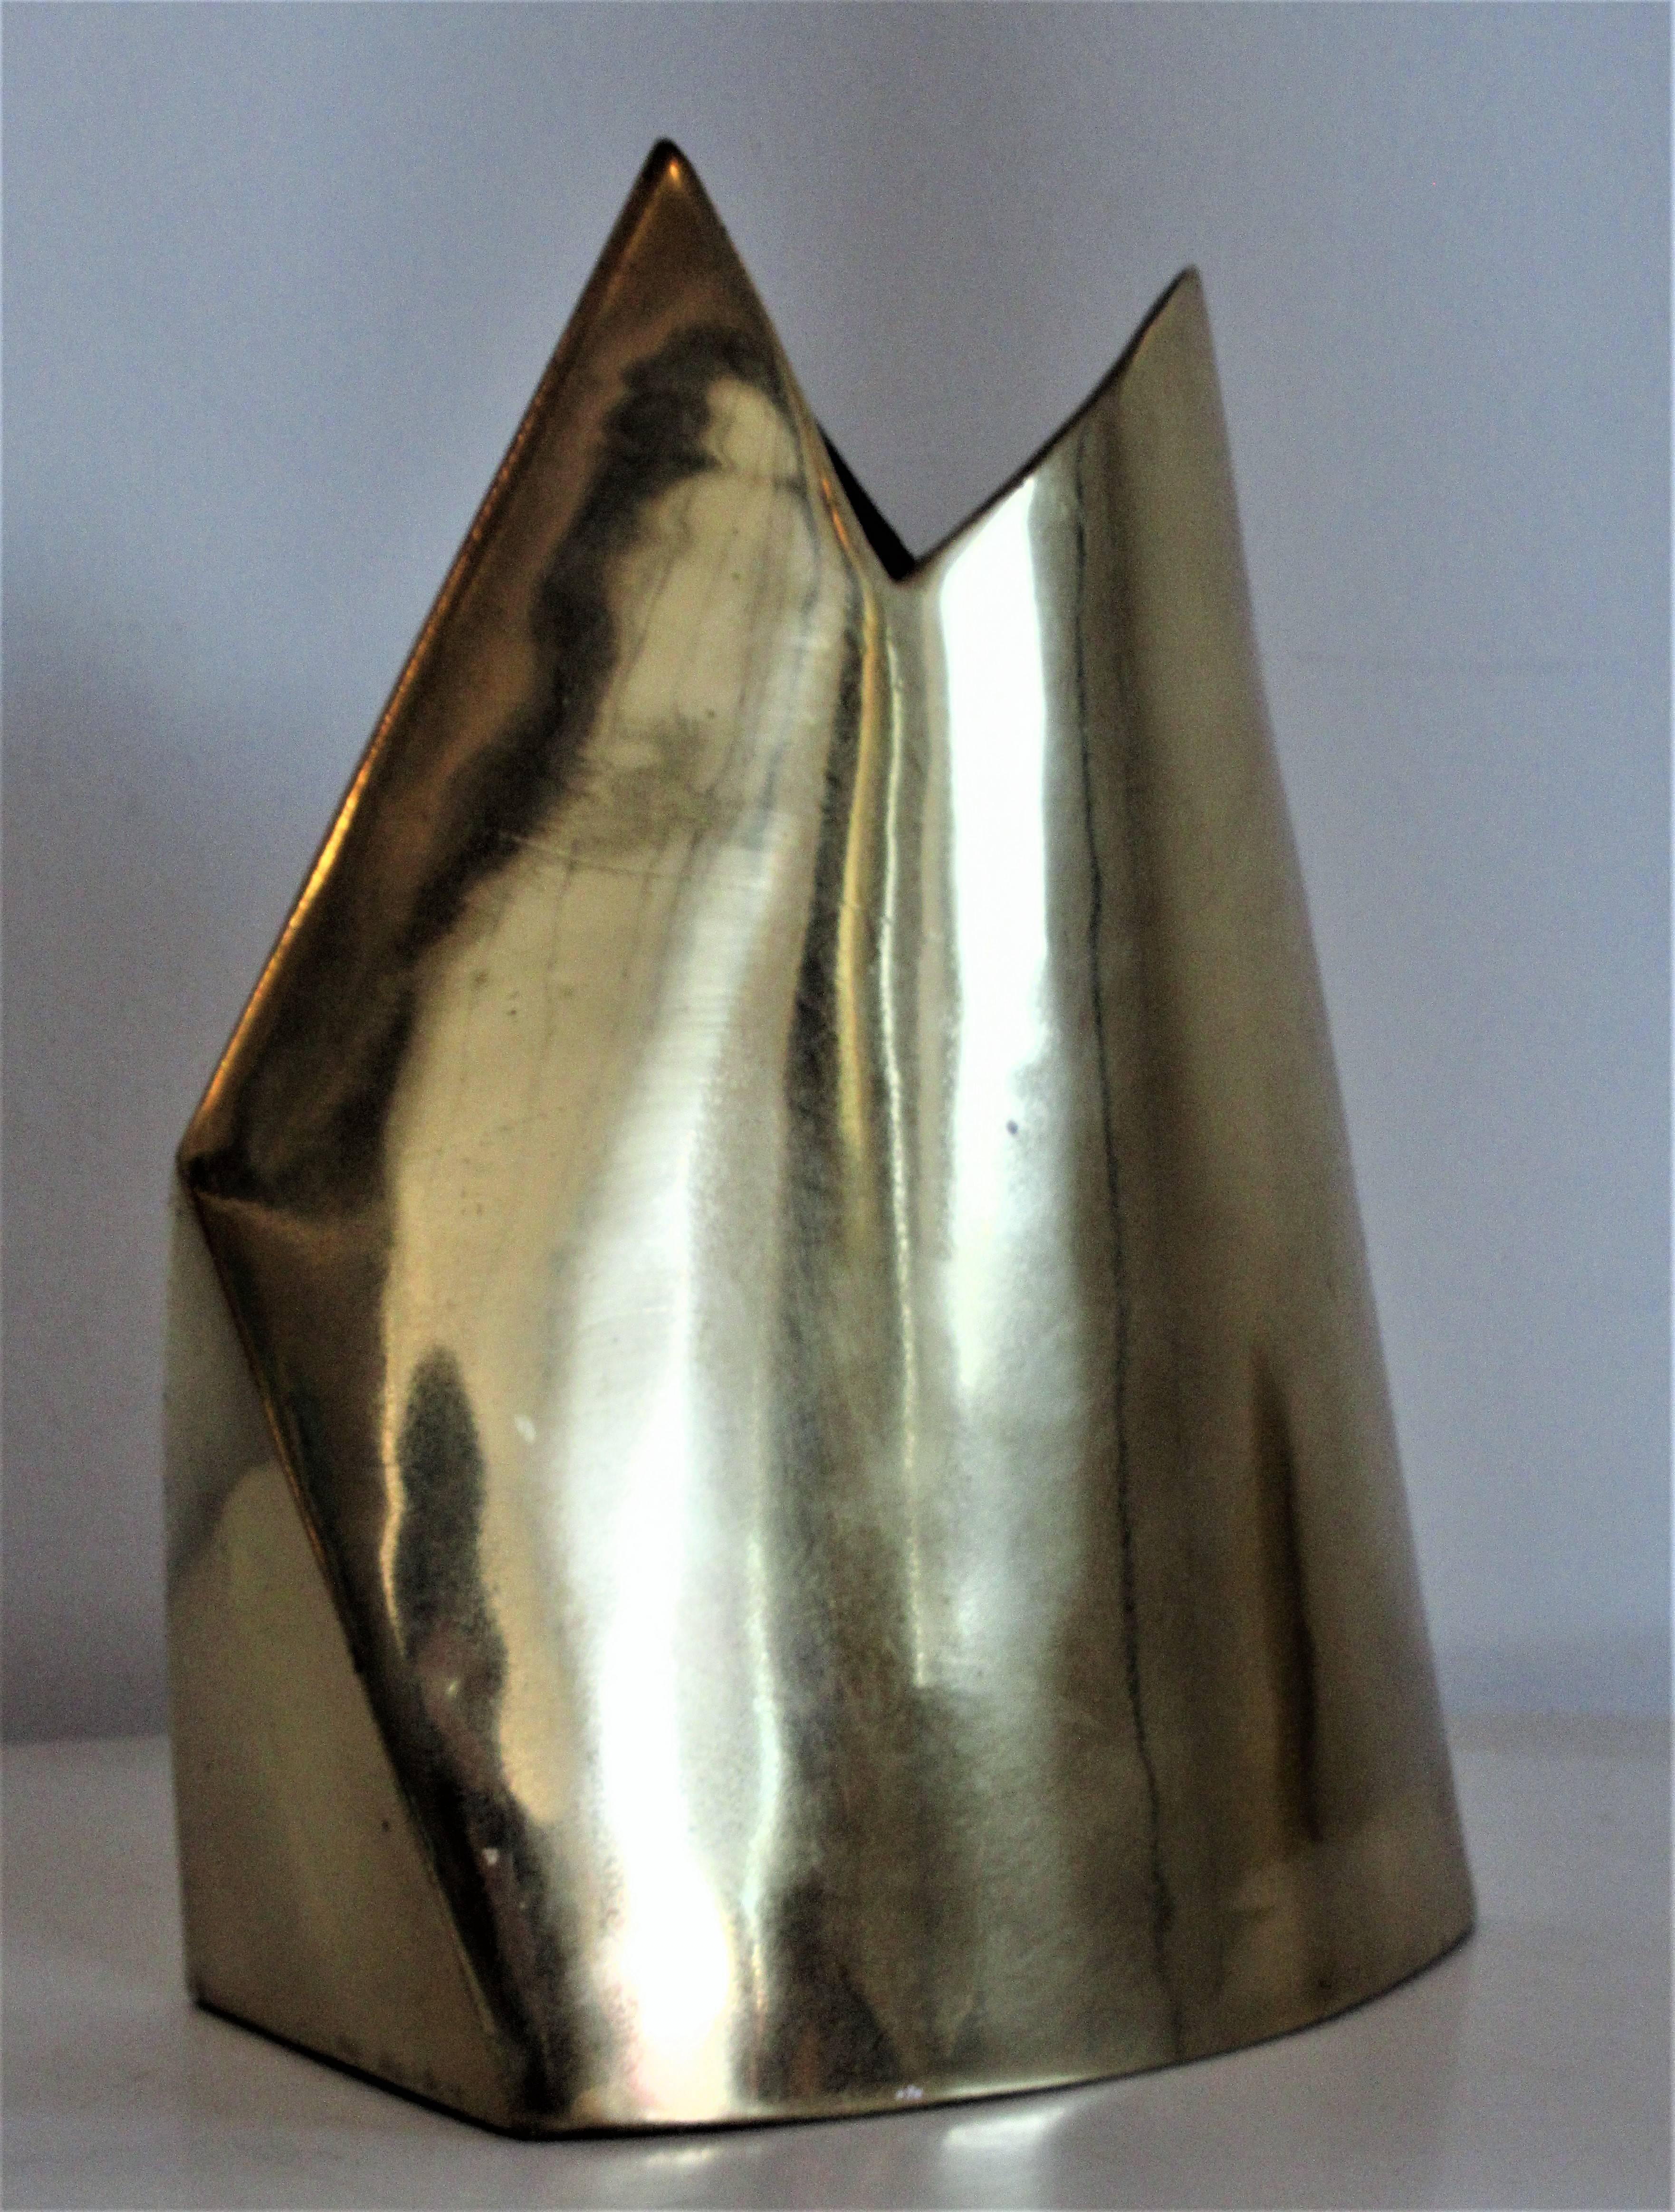 Two complimenting brass vases with a cutting edge sleek architectonic design form by James Johnston, circa 1980. Both are signed on underside, see picture. Small vase measures 9 1/4